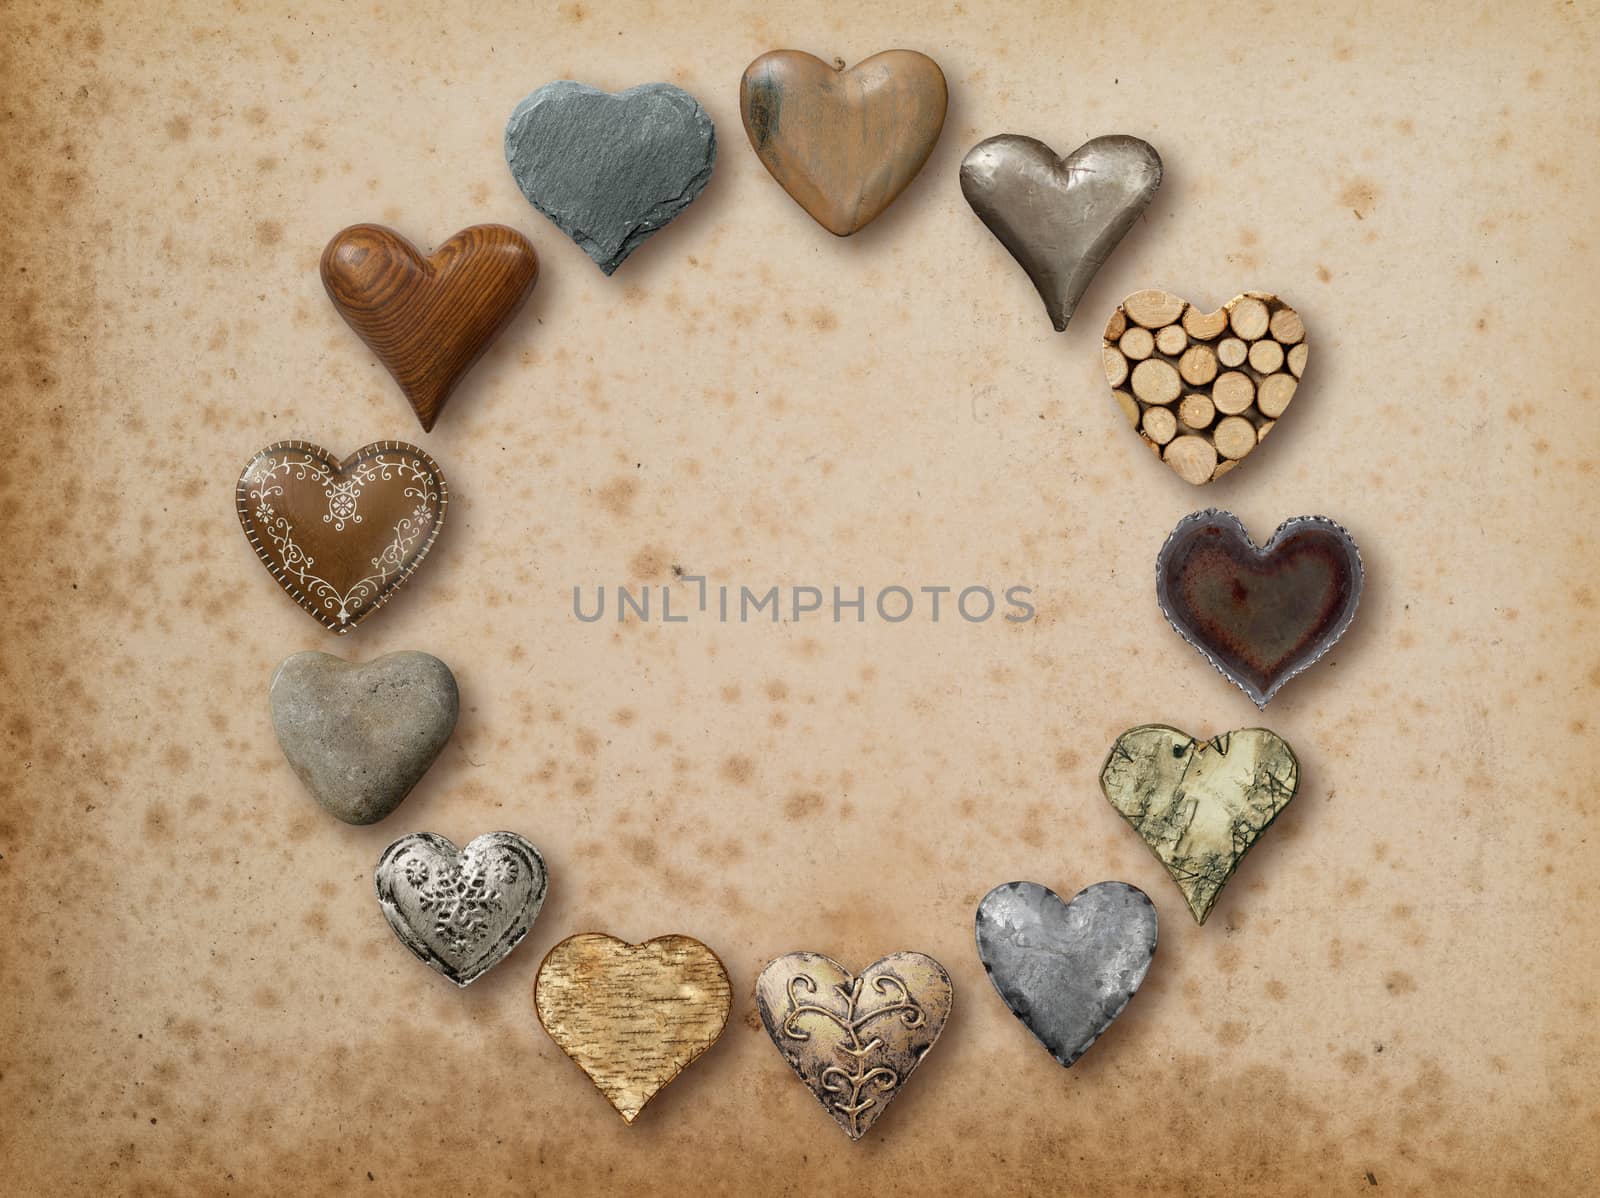 Photo of metal, wood and stone heart-shaped things organized in a circle over vintage paper background.
